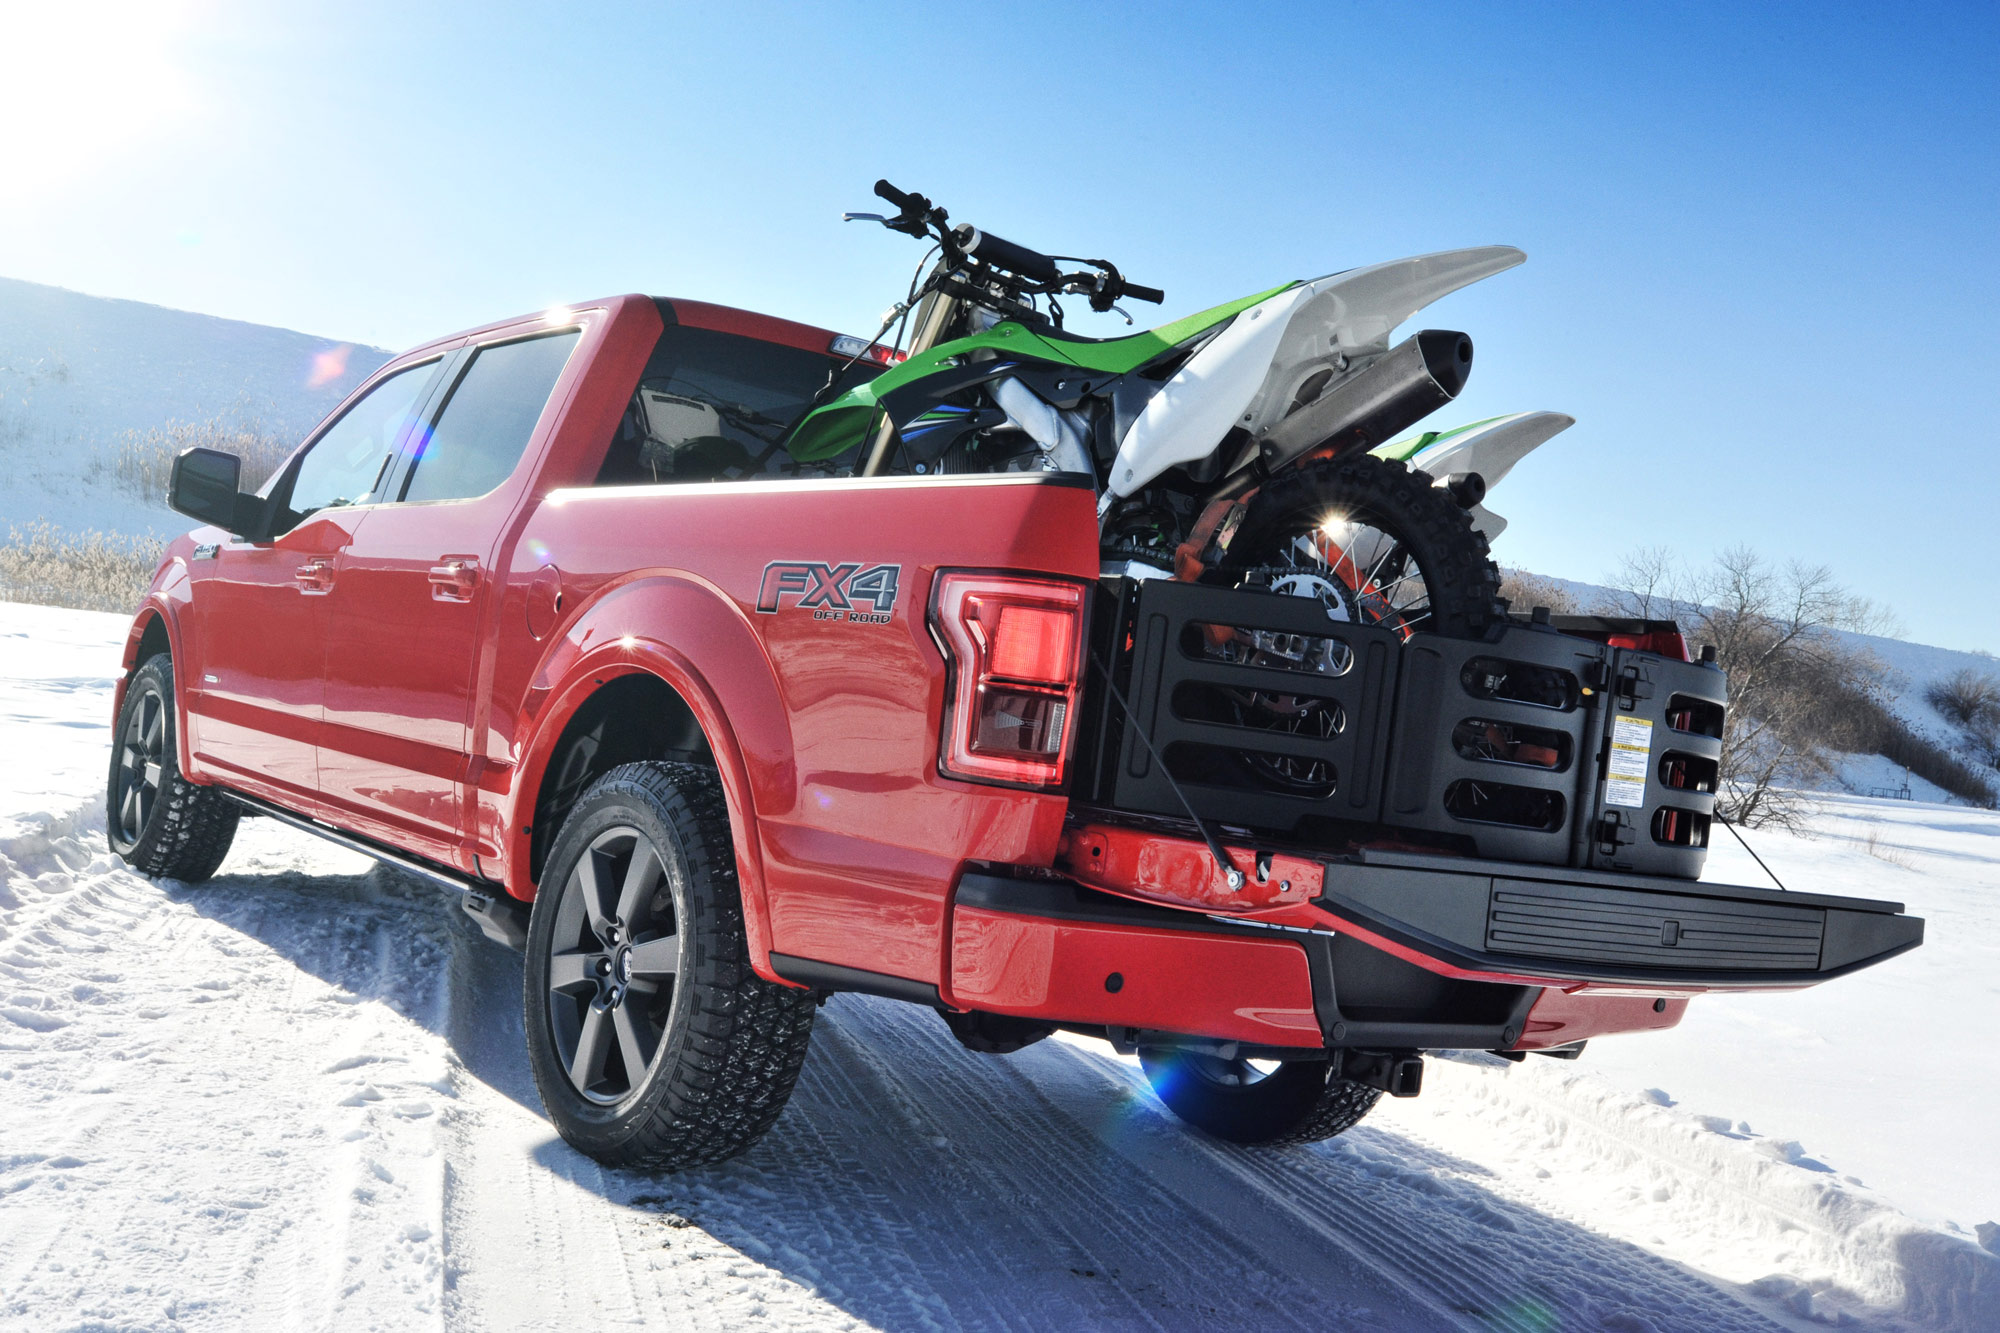 Pair of motorcycles in bed of red Ford F-150 FX4 on snow